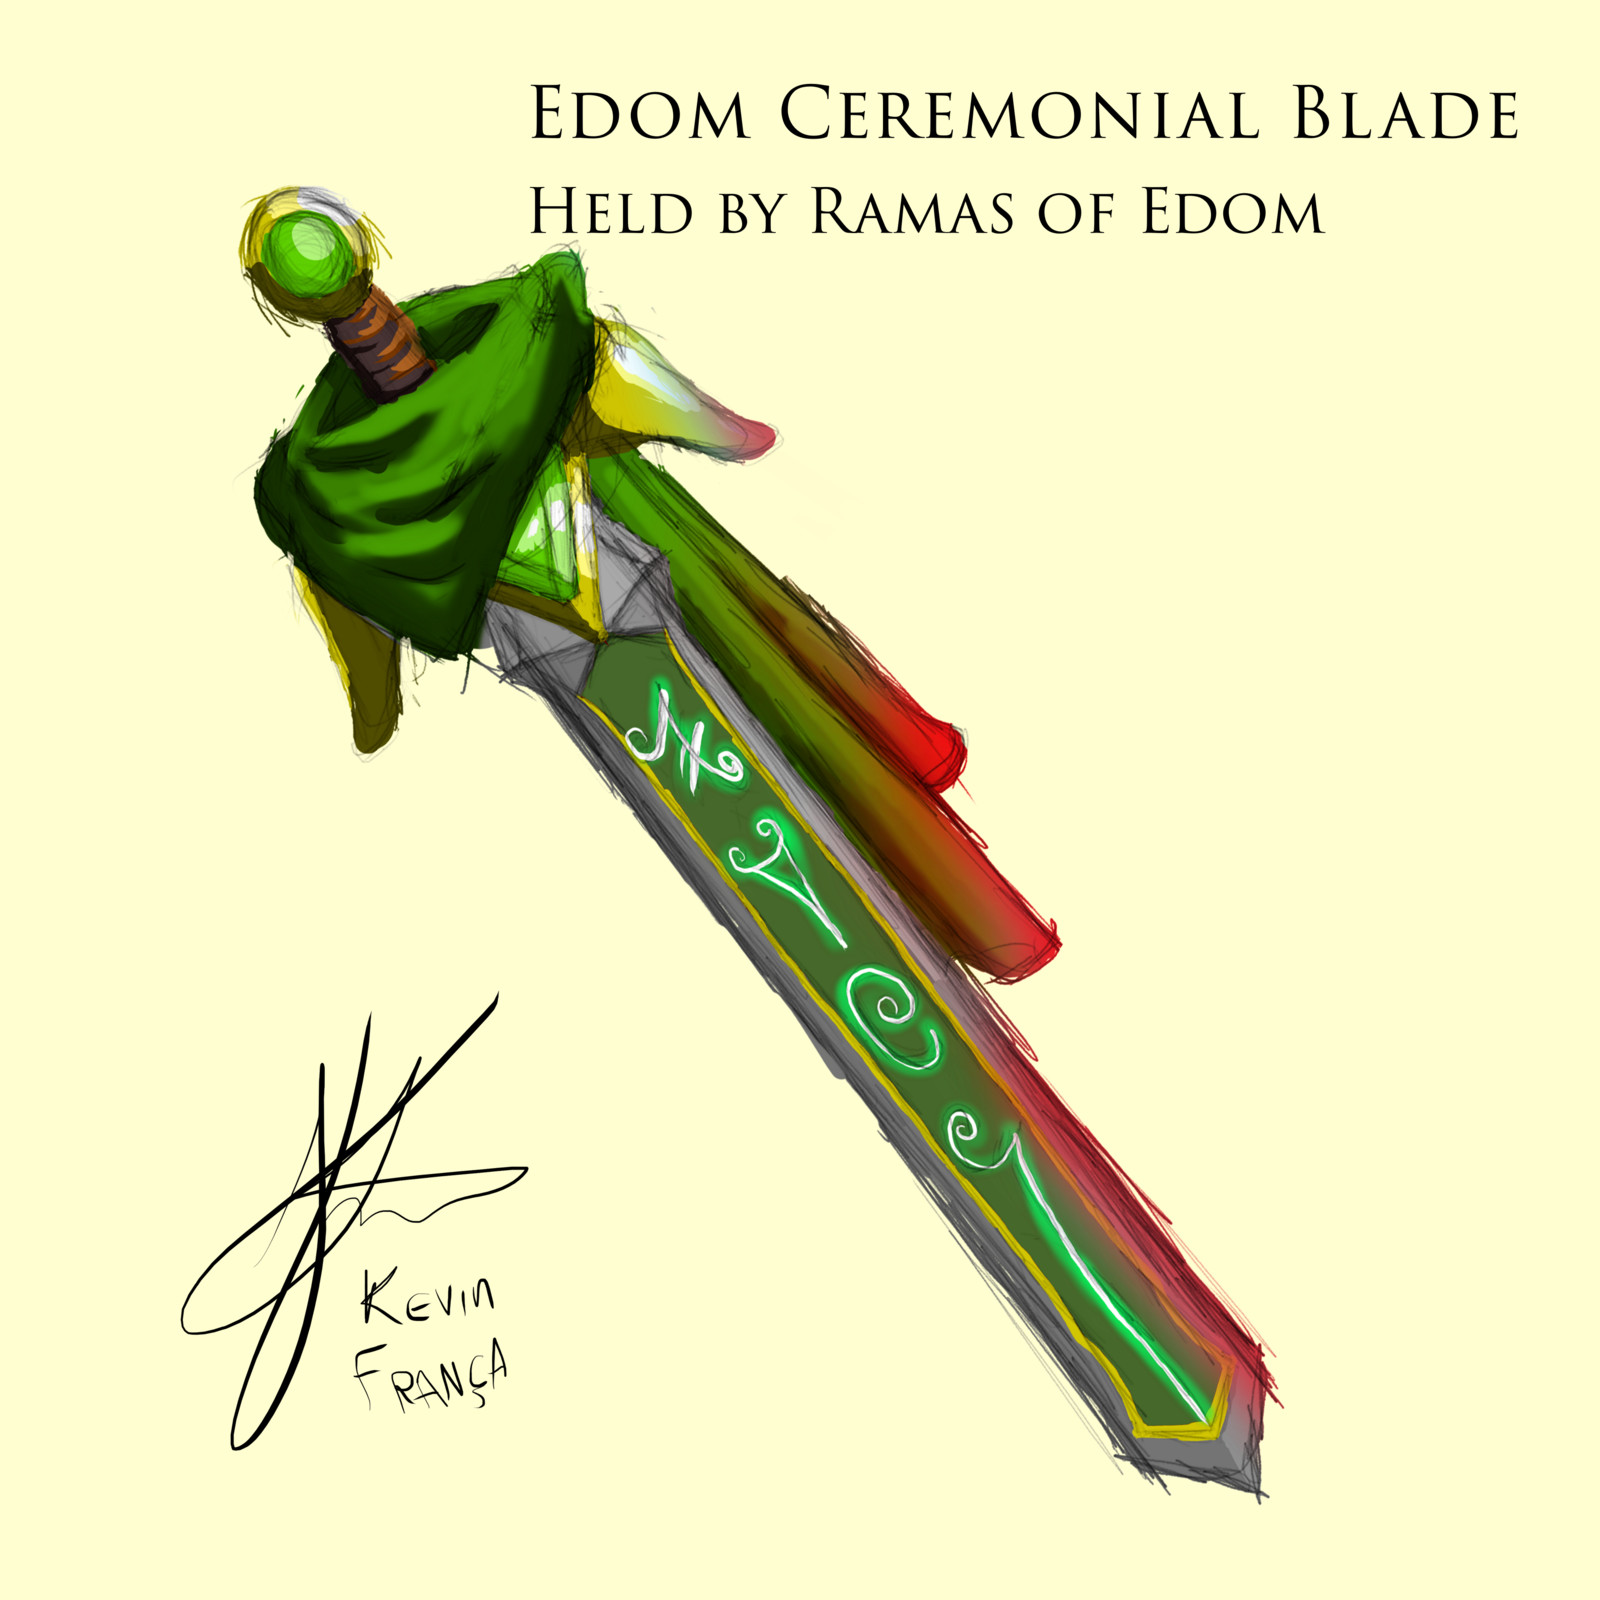 Edom Ceremonial Blade - Once held by Ramas of Edom (former Smith Moloi).
Paladin who pilgrimed for long through lands unknown to reach enlightment, unfortunately deceased due to an attack by a false god.